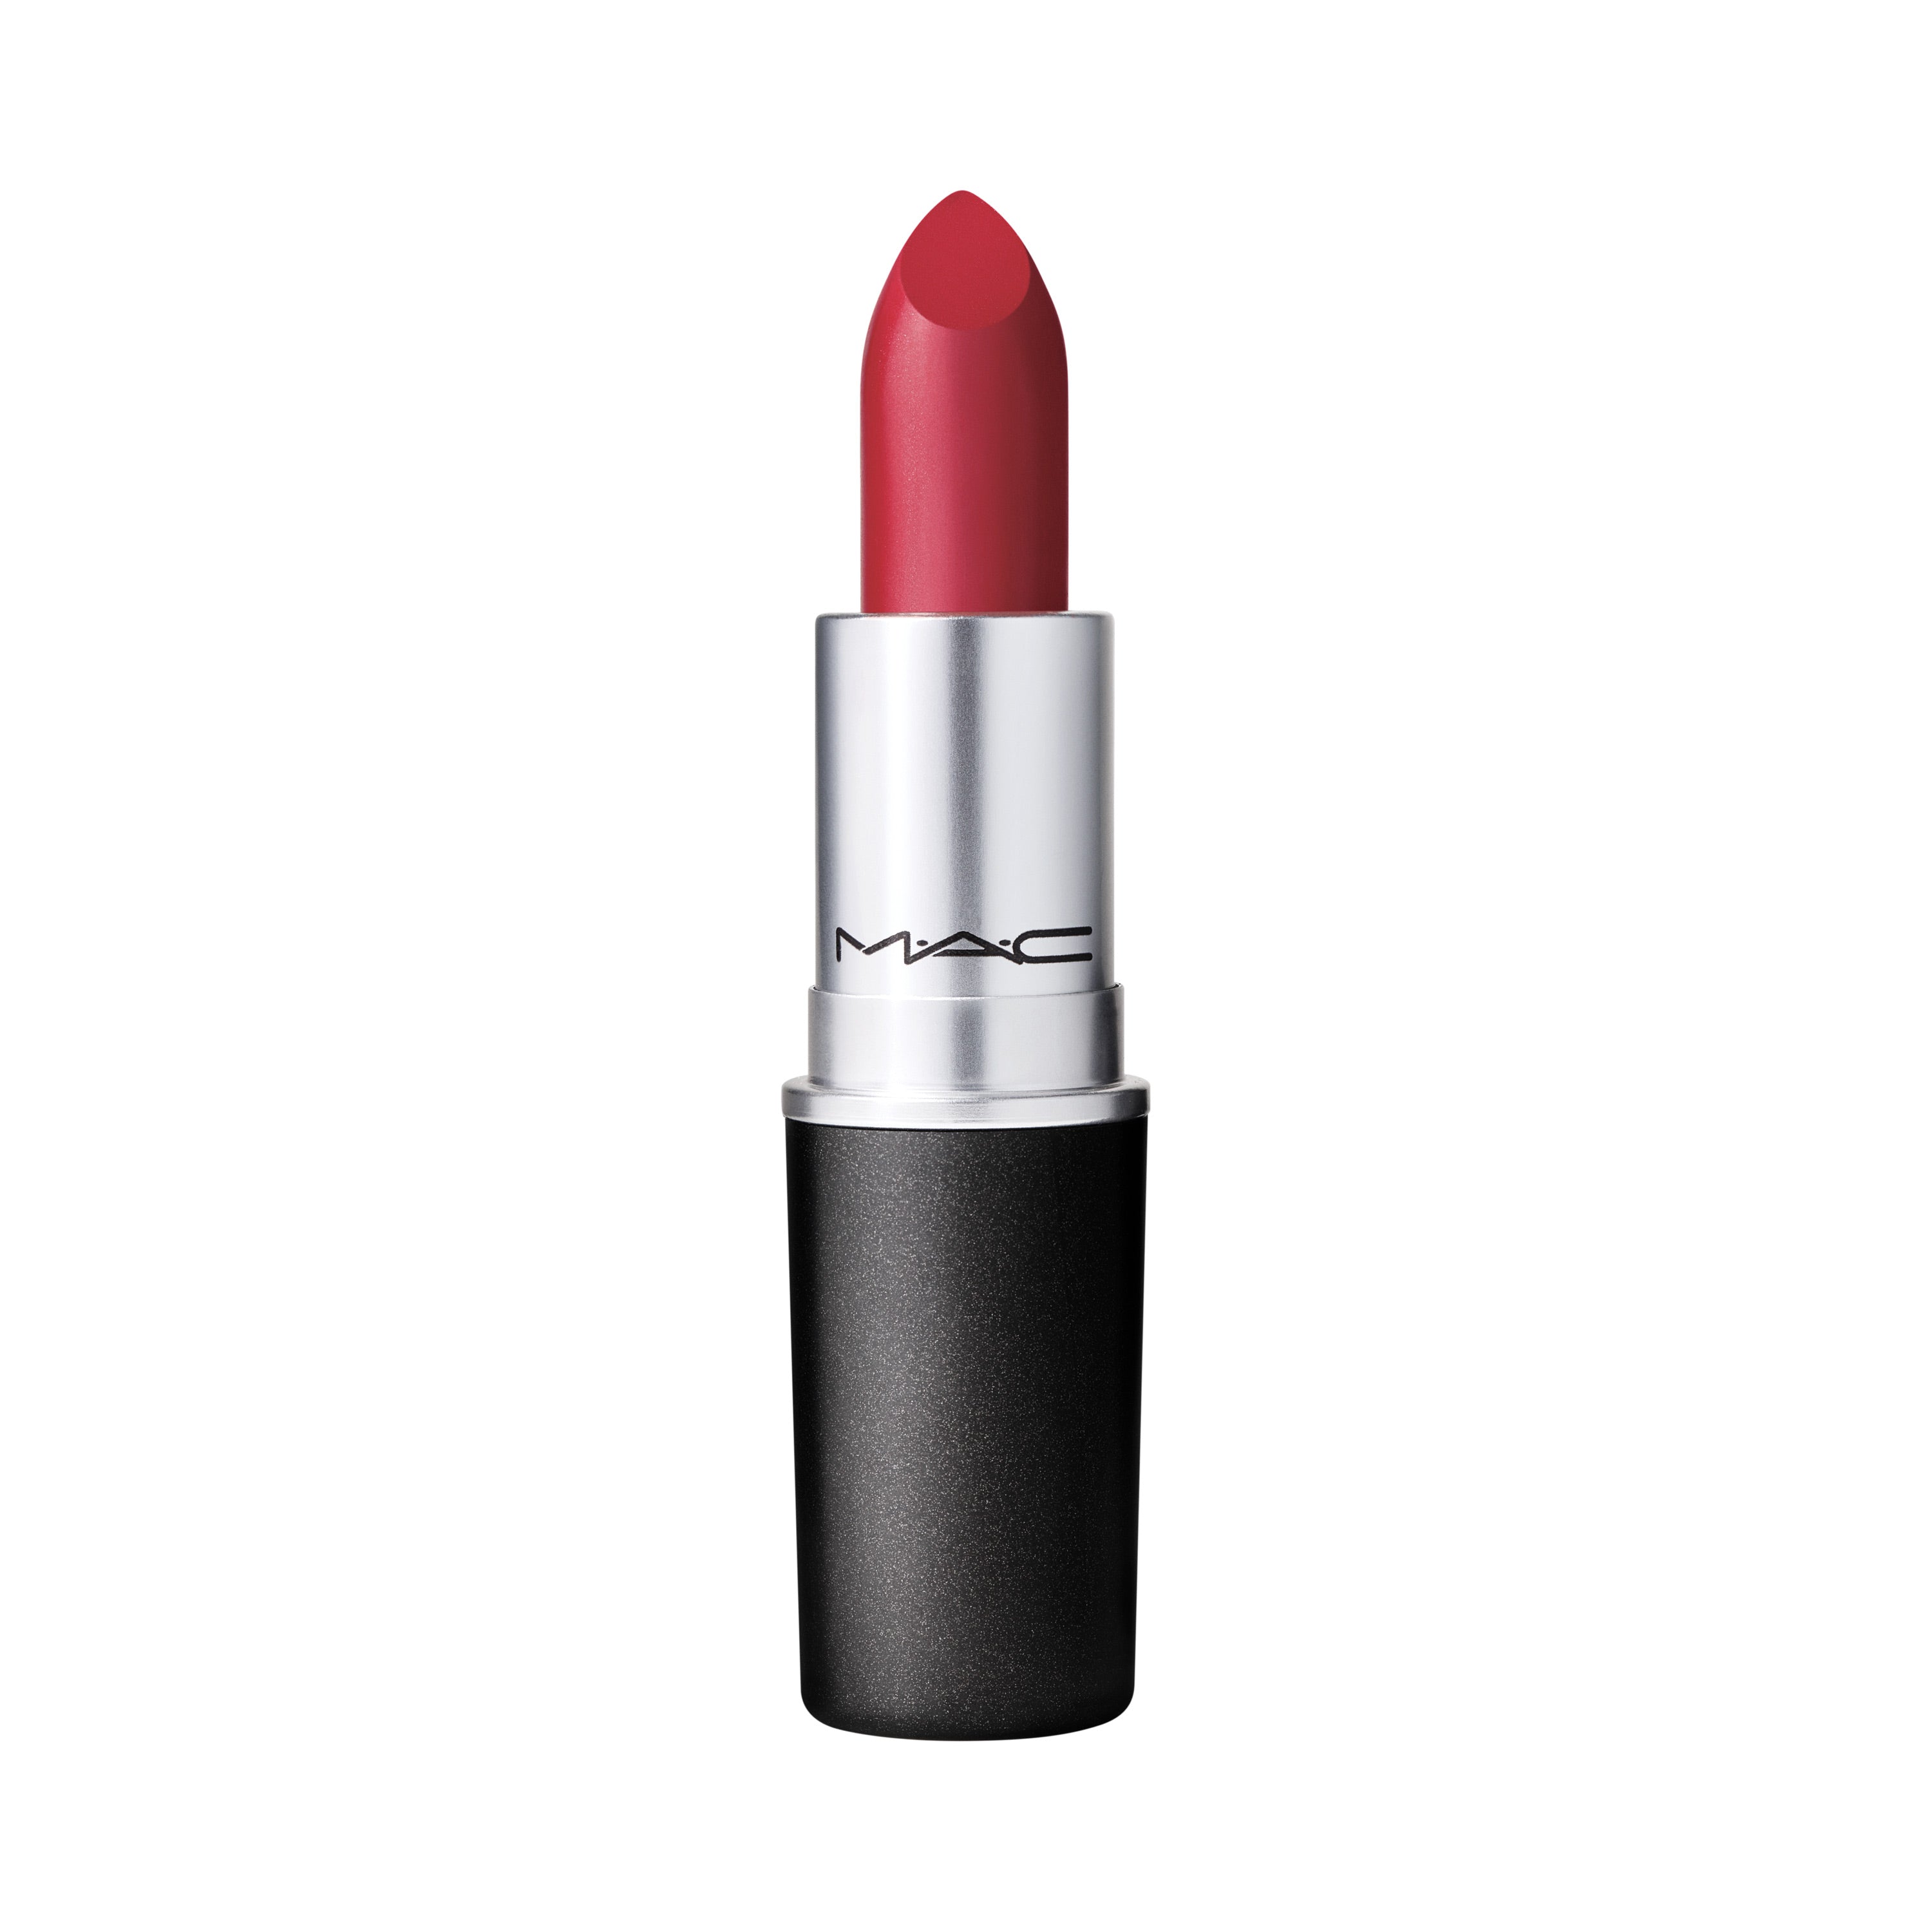 [GIFT] Non-commercial gift - MAC Lipstick valued 670K VND